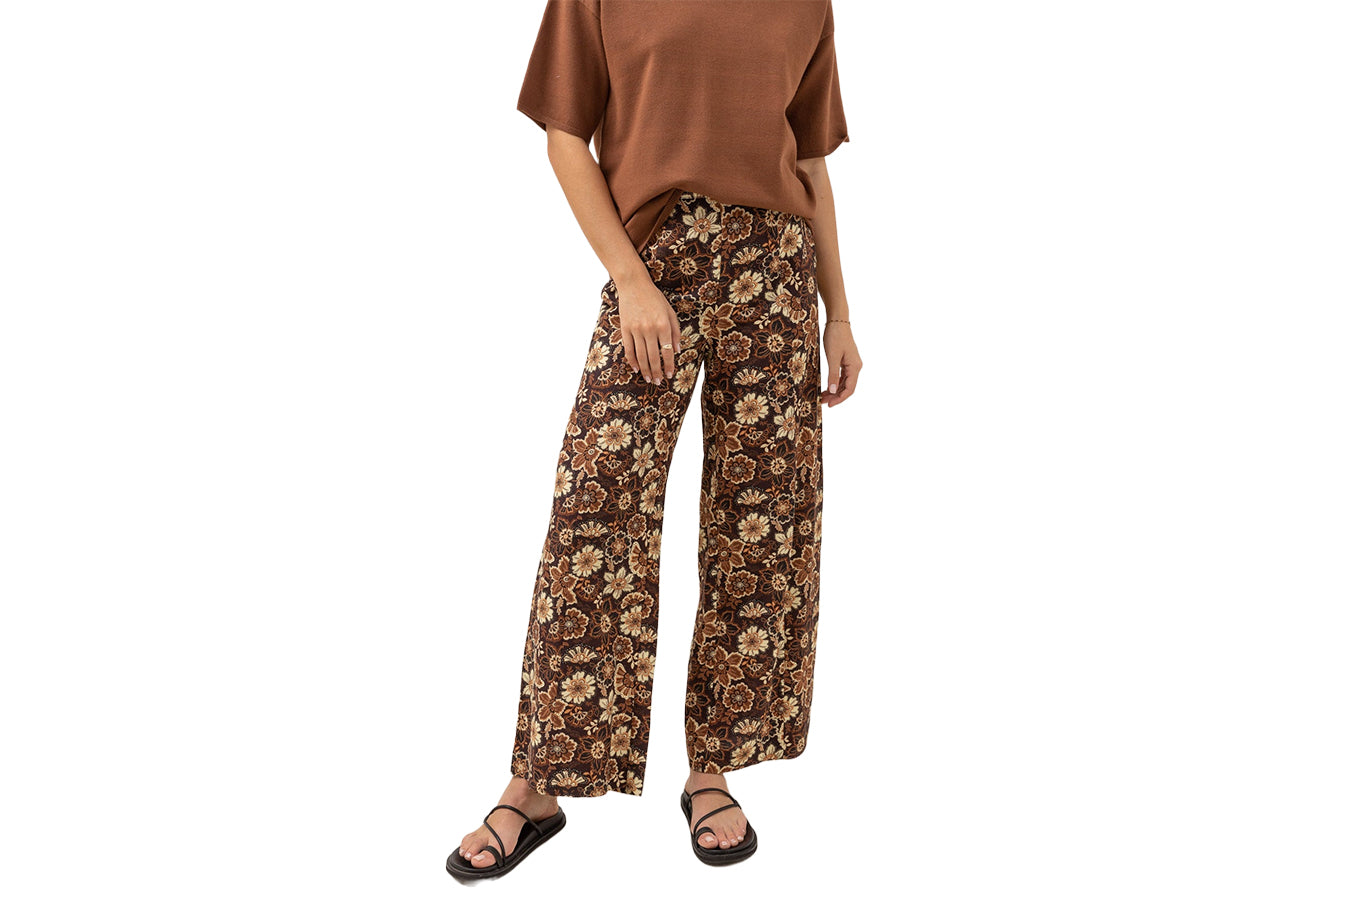 Oversized Bell Bottom Floral Pant